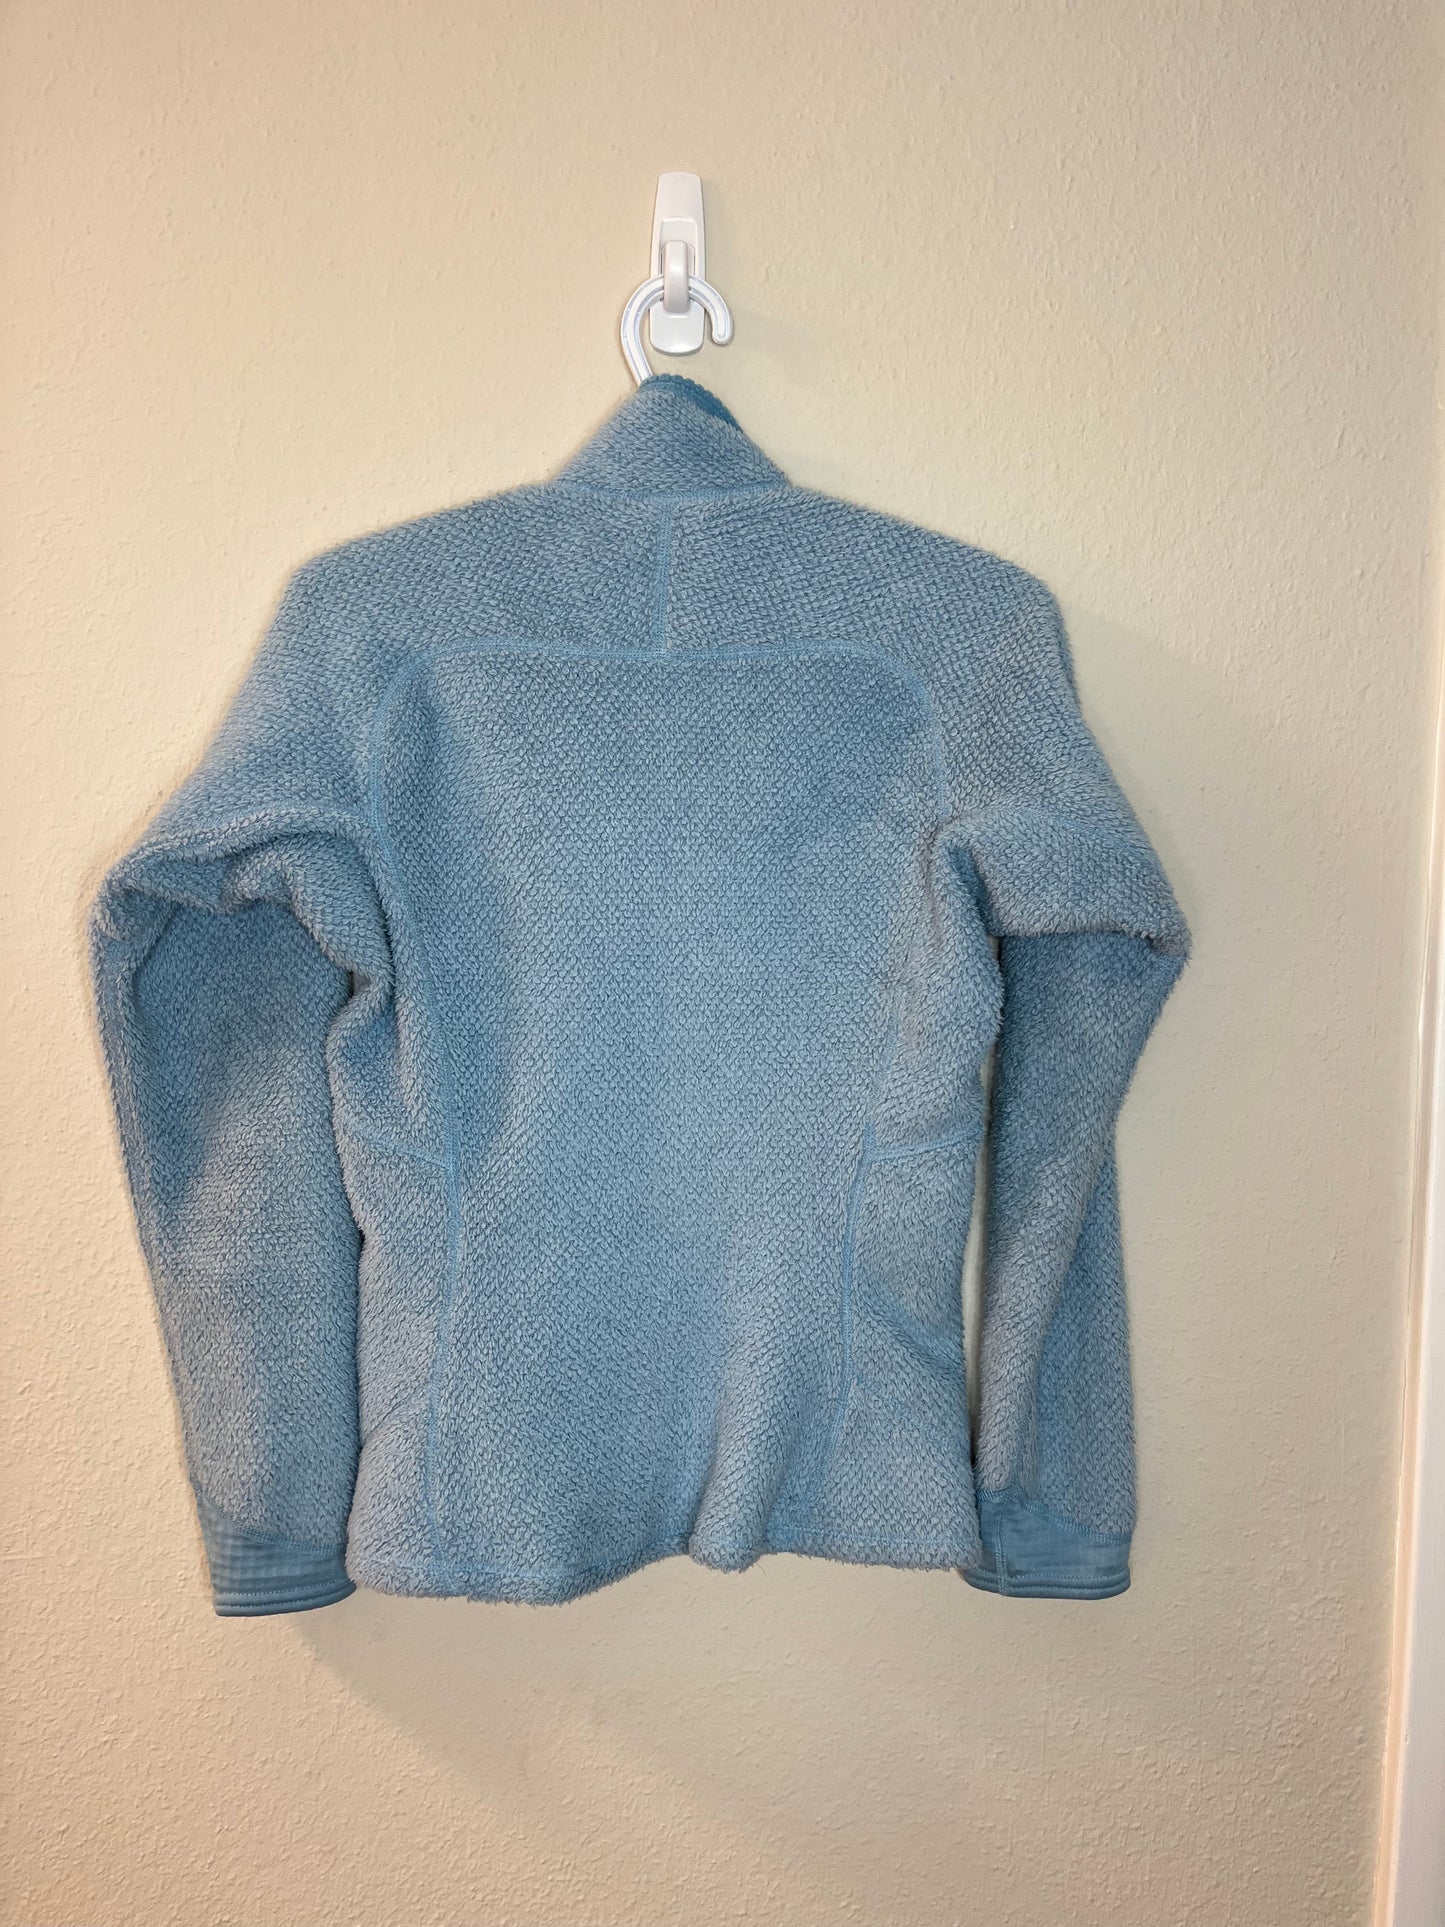 Patagonia Zip Up Sweater (small)